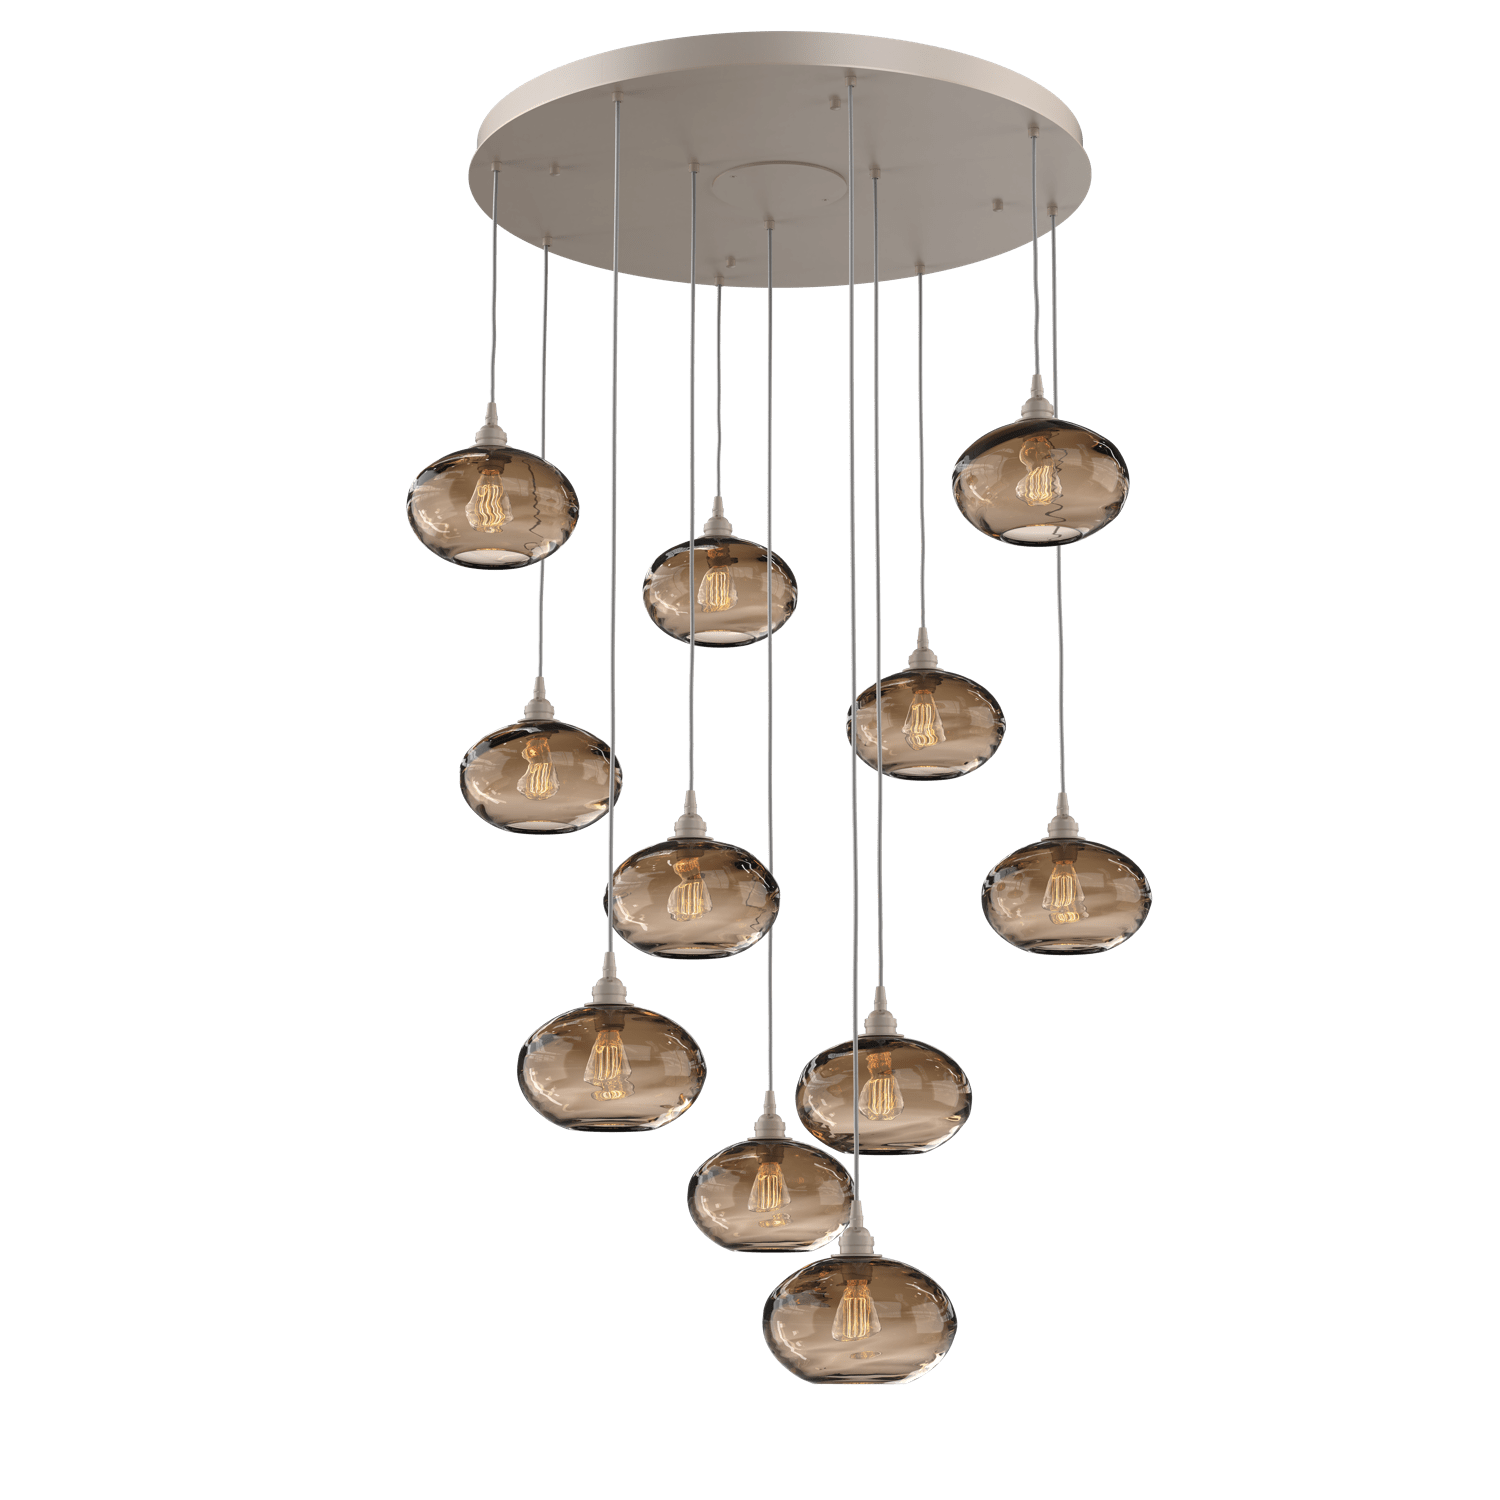 CHB0036-11-BS-OB-Hammerton-Studio-Optic-Blown-Glass-Coppa-11-light-round-pendant-chandelier-with-metallic-beige-silver-finish-and-optic-bronze-blown-glass-shades-and-incandescent-lamping